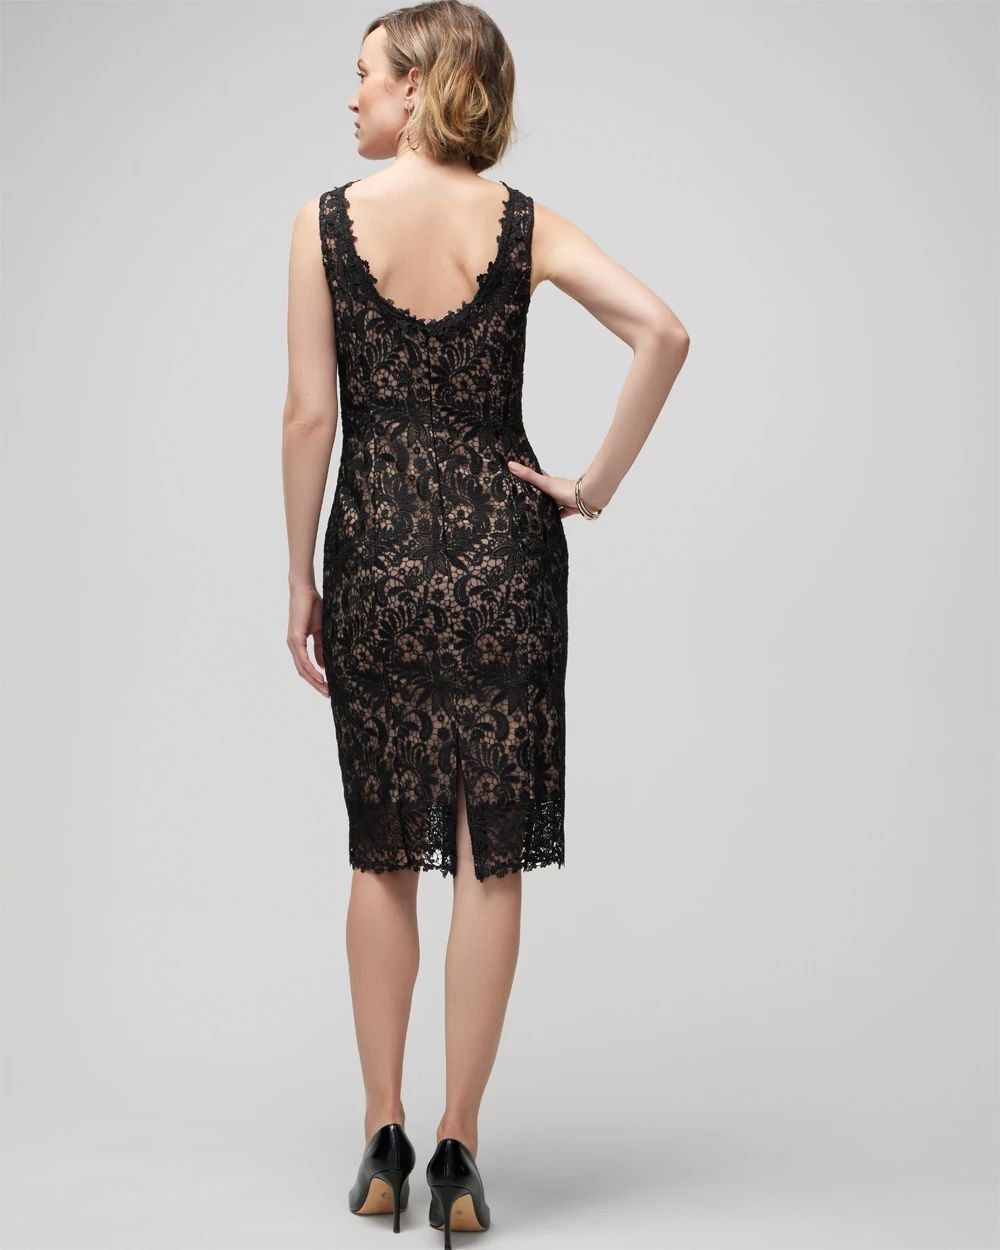 Illusion Neck Lace Sheath Dress click to view larger image.